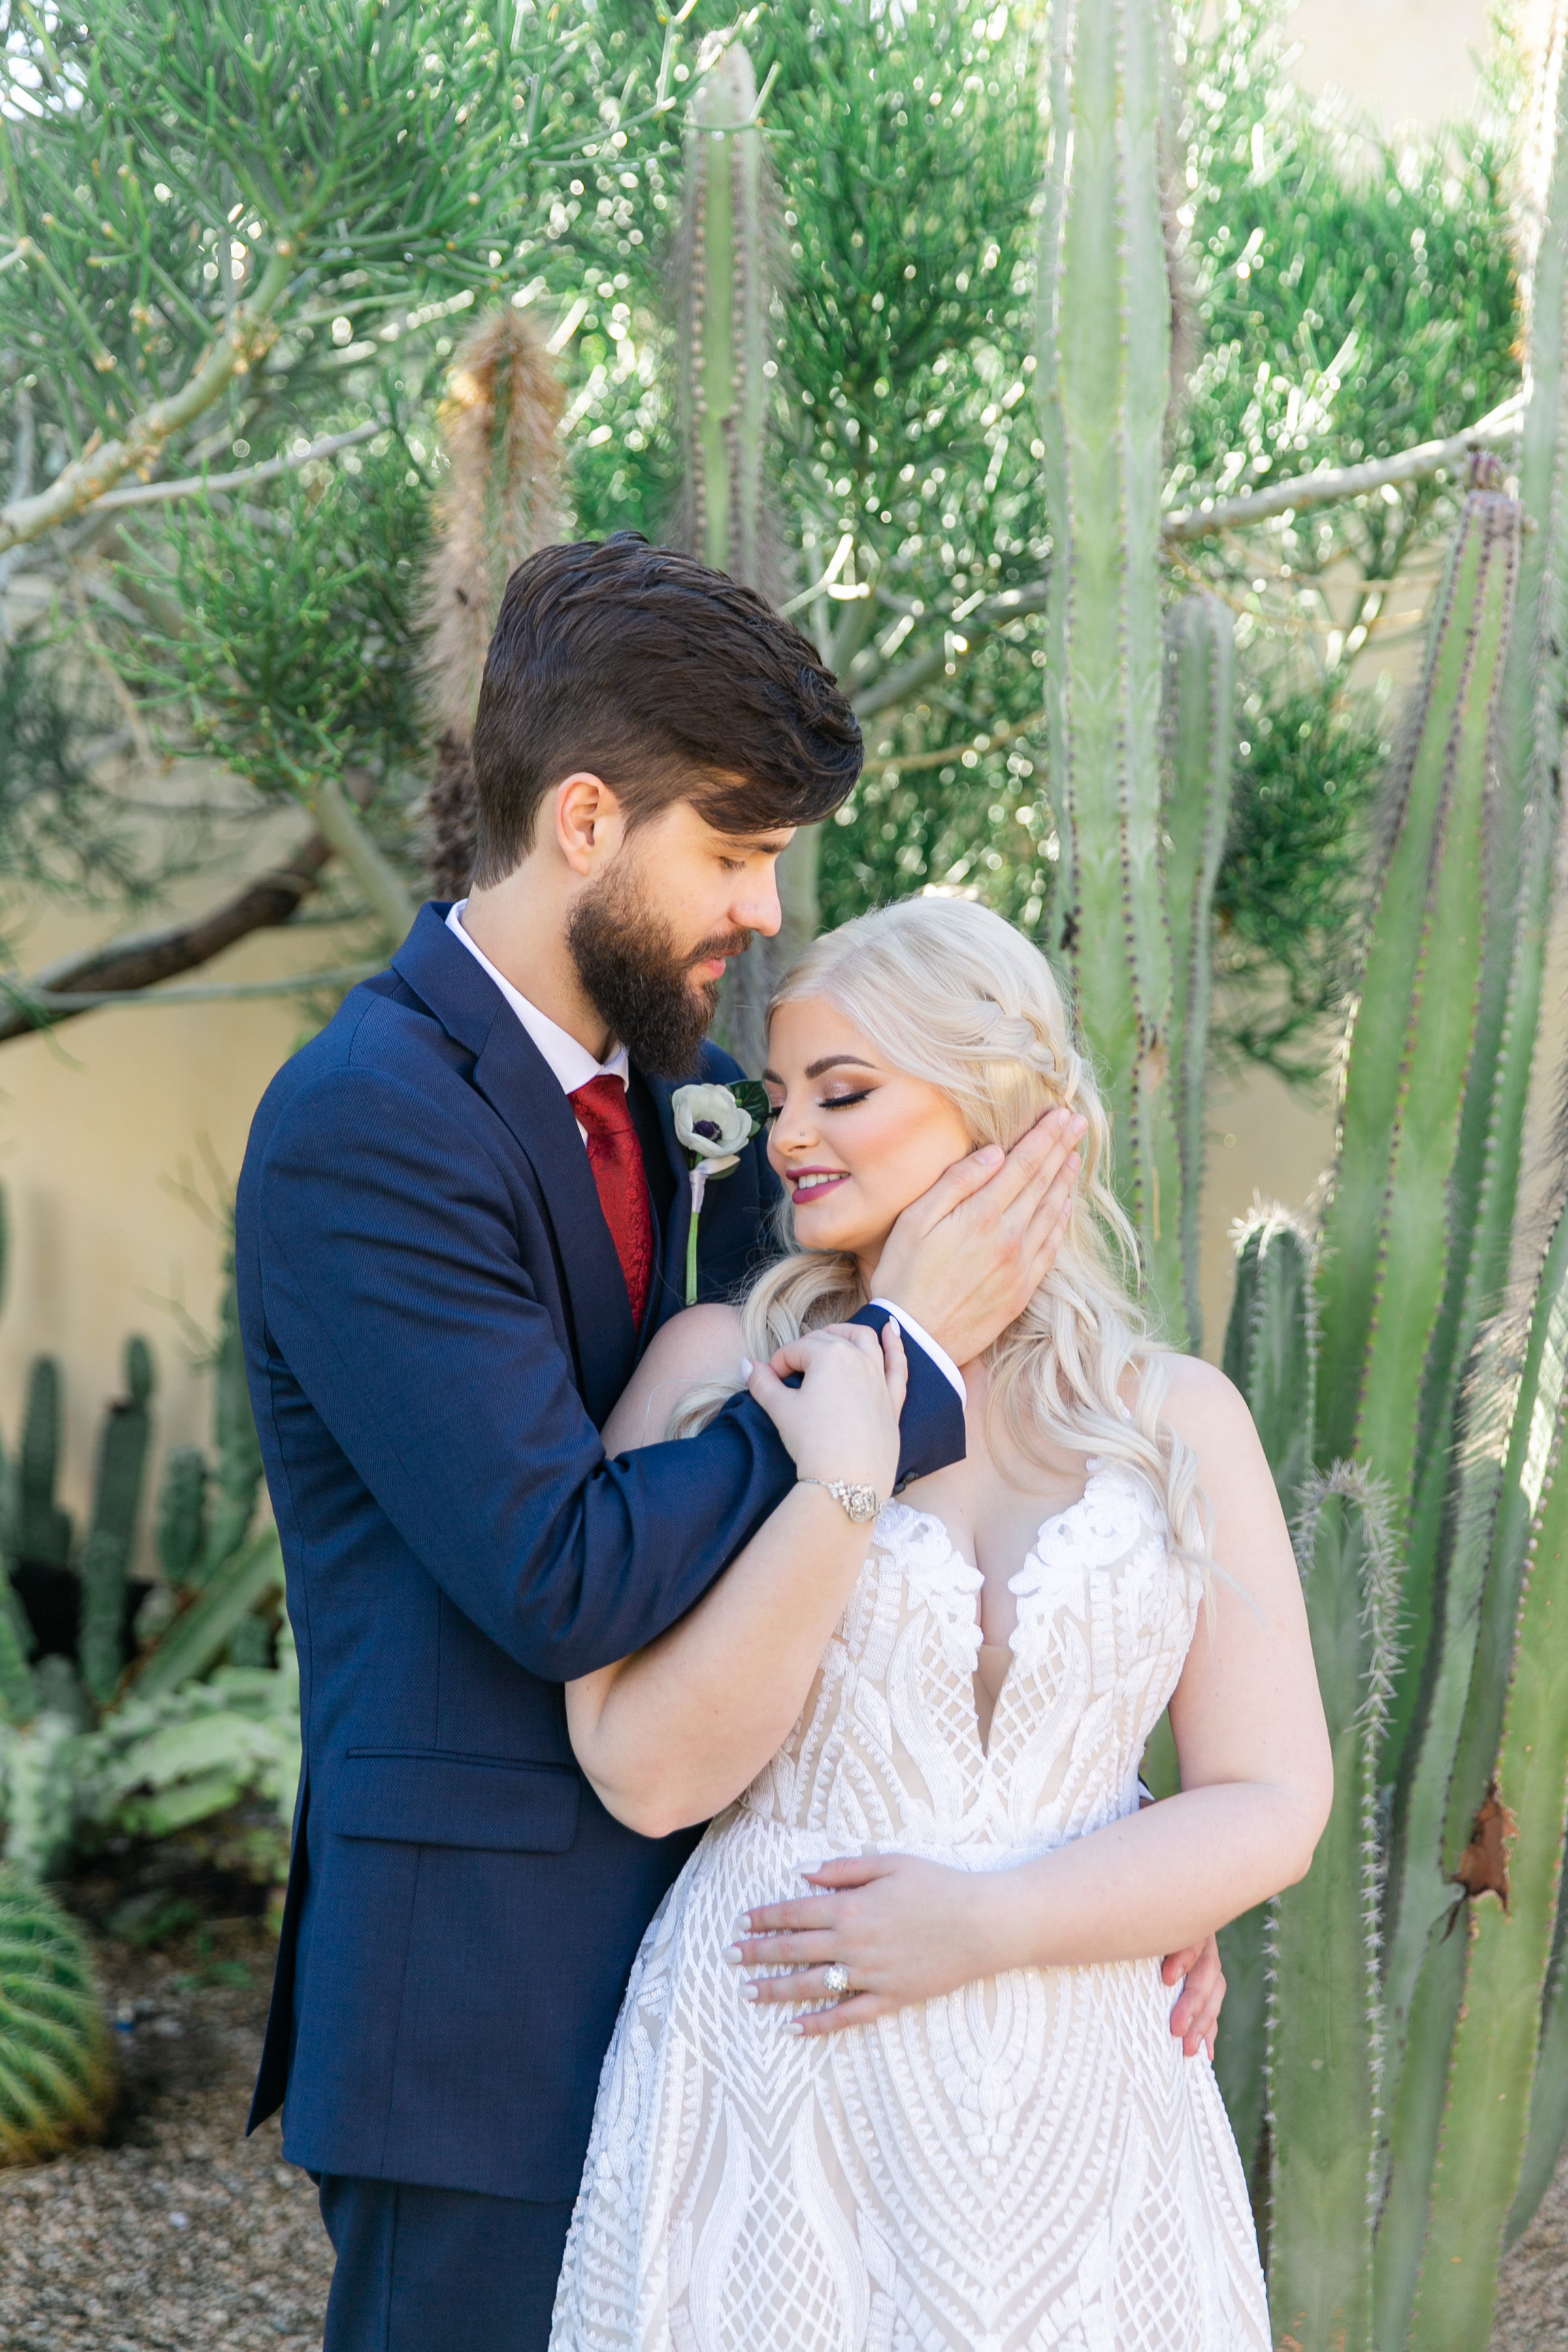 Karlie Colleen Photography - The Royal Palms Wedding - Some Like It Classic - Alex & Sam-163